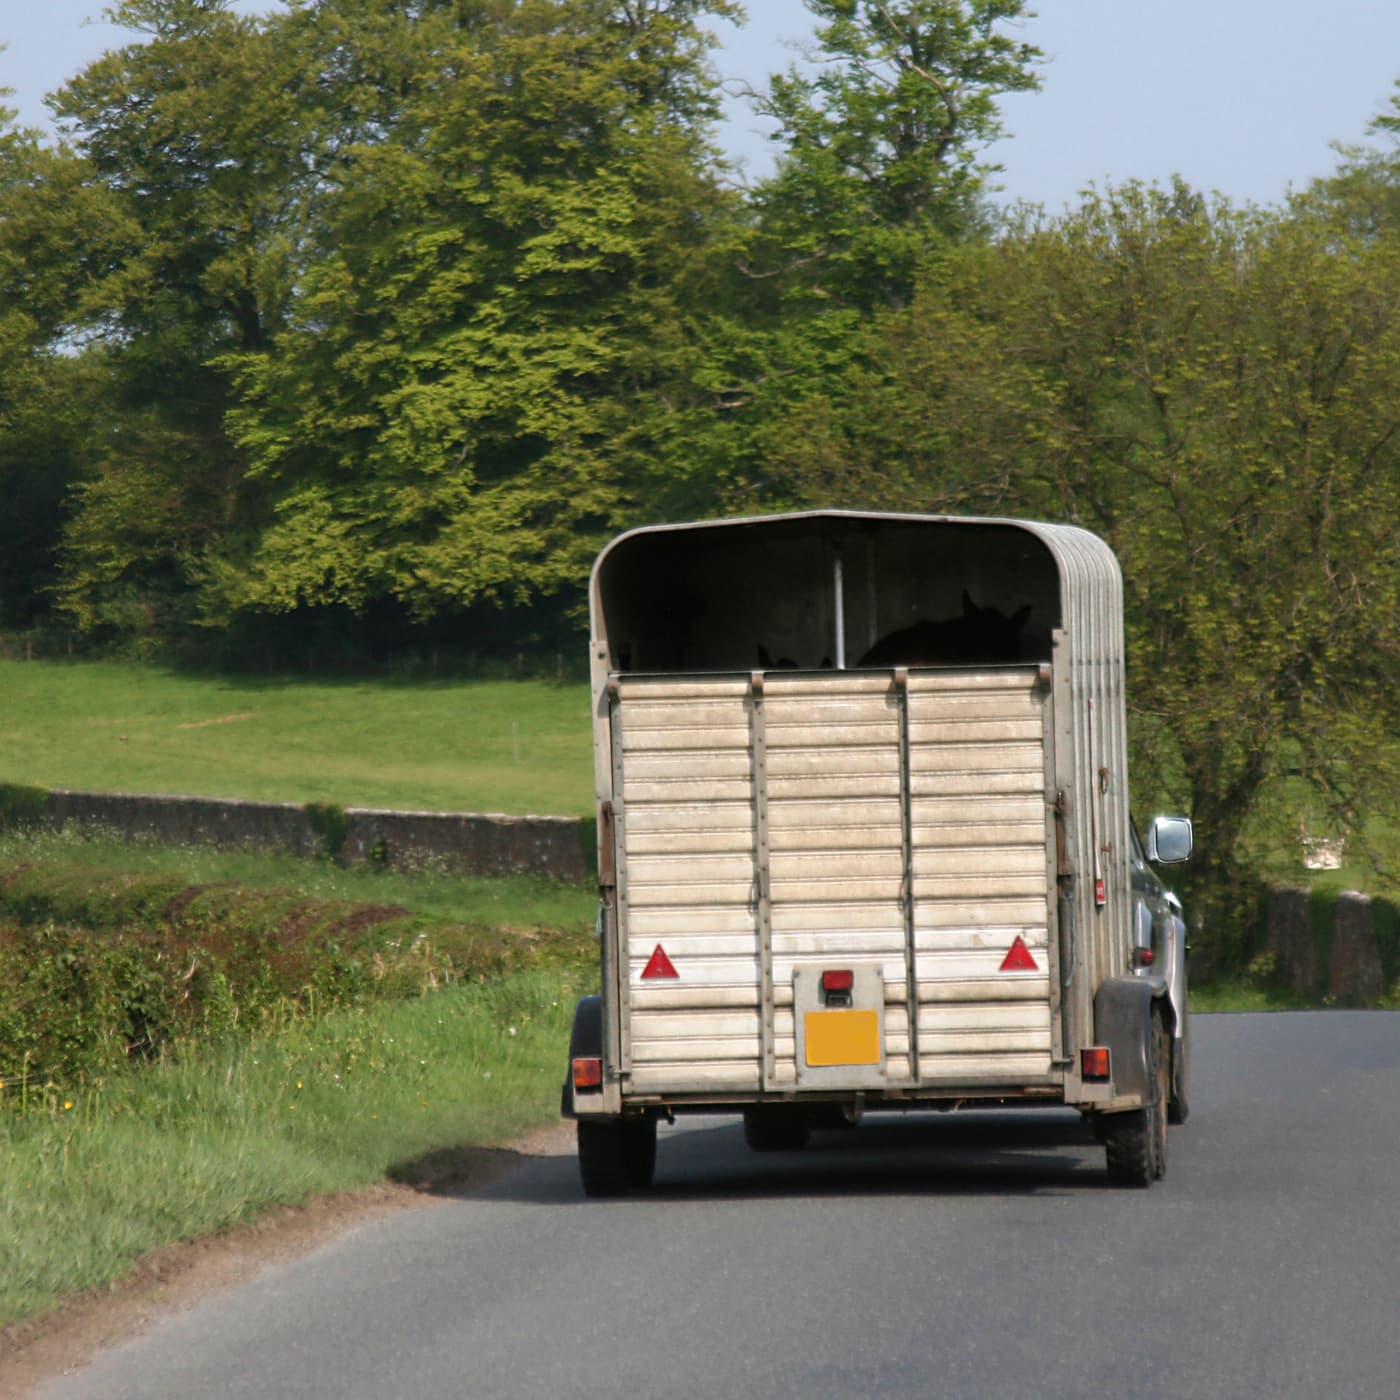 Horse trailer traveling down an empty country road.